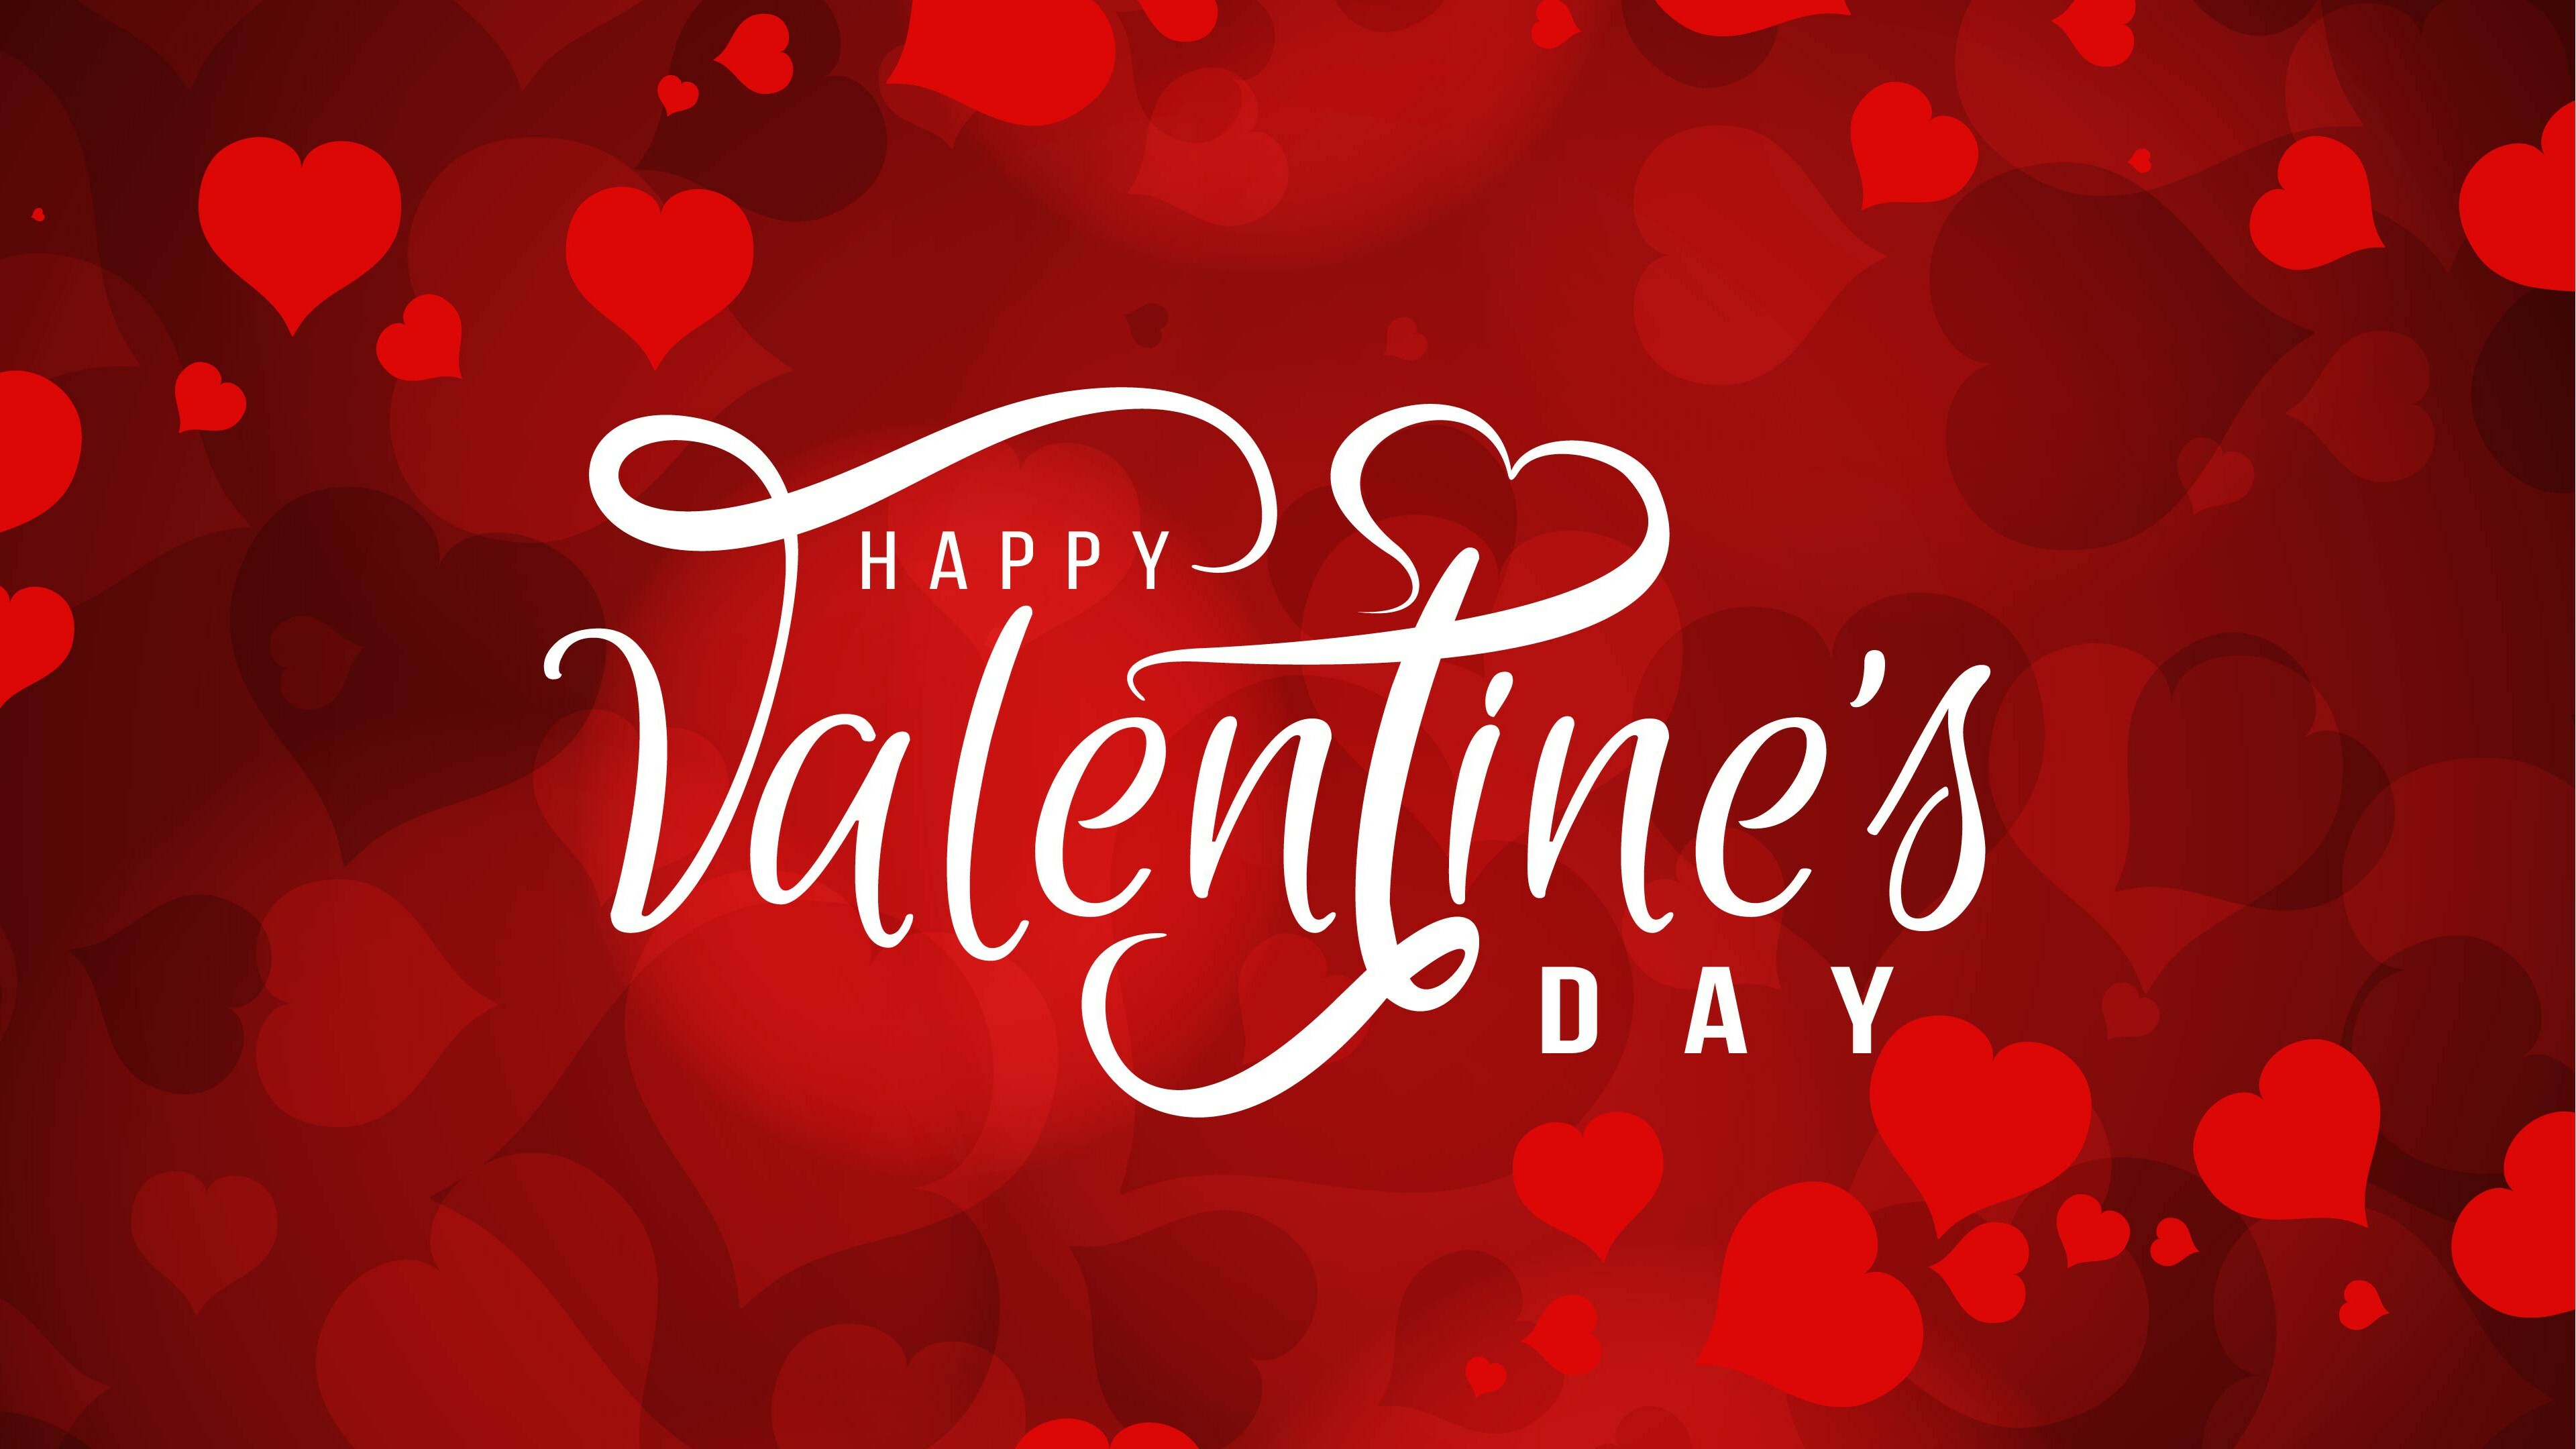 Valentine's Day: An annual festival to celebrate romantic love, Hearts. 3840x2160 4K Background.